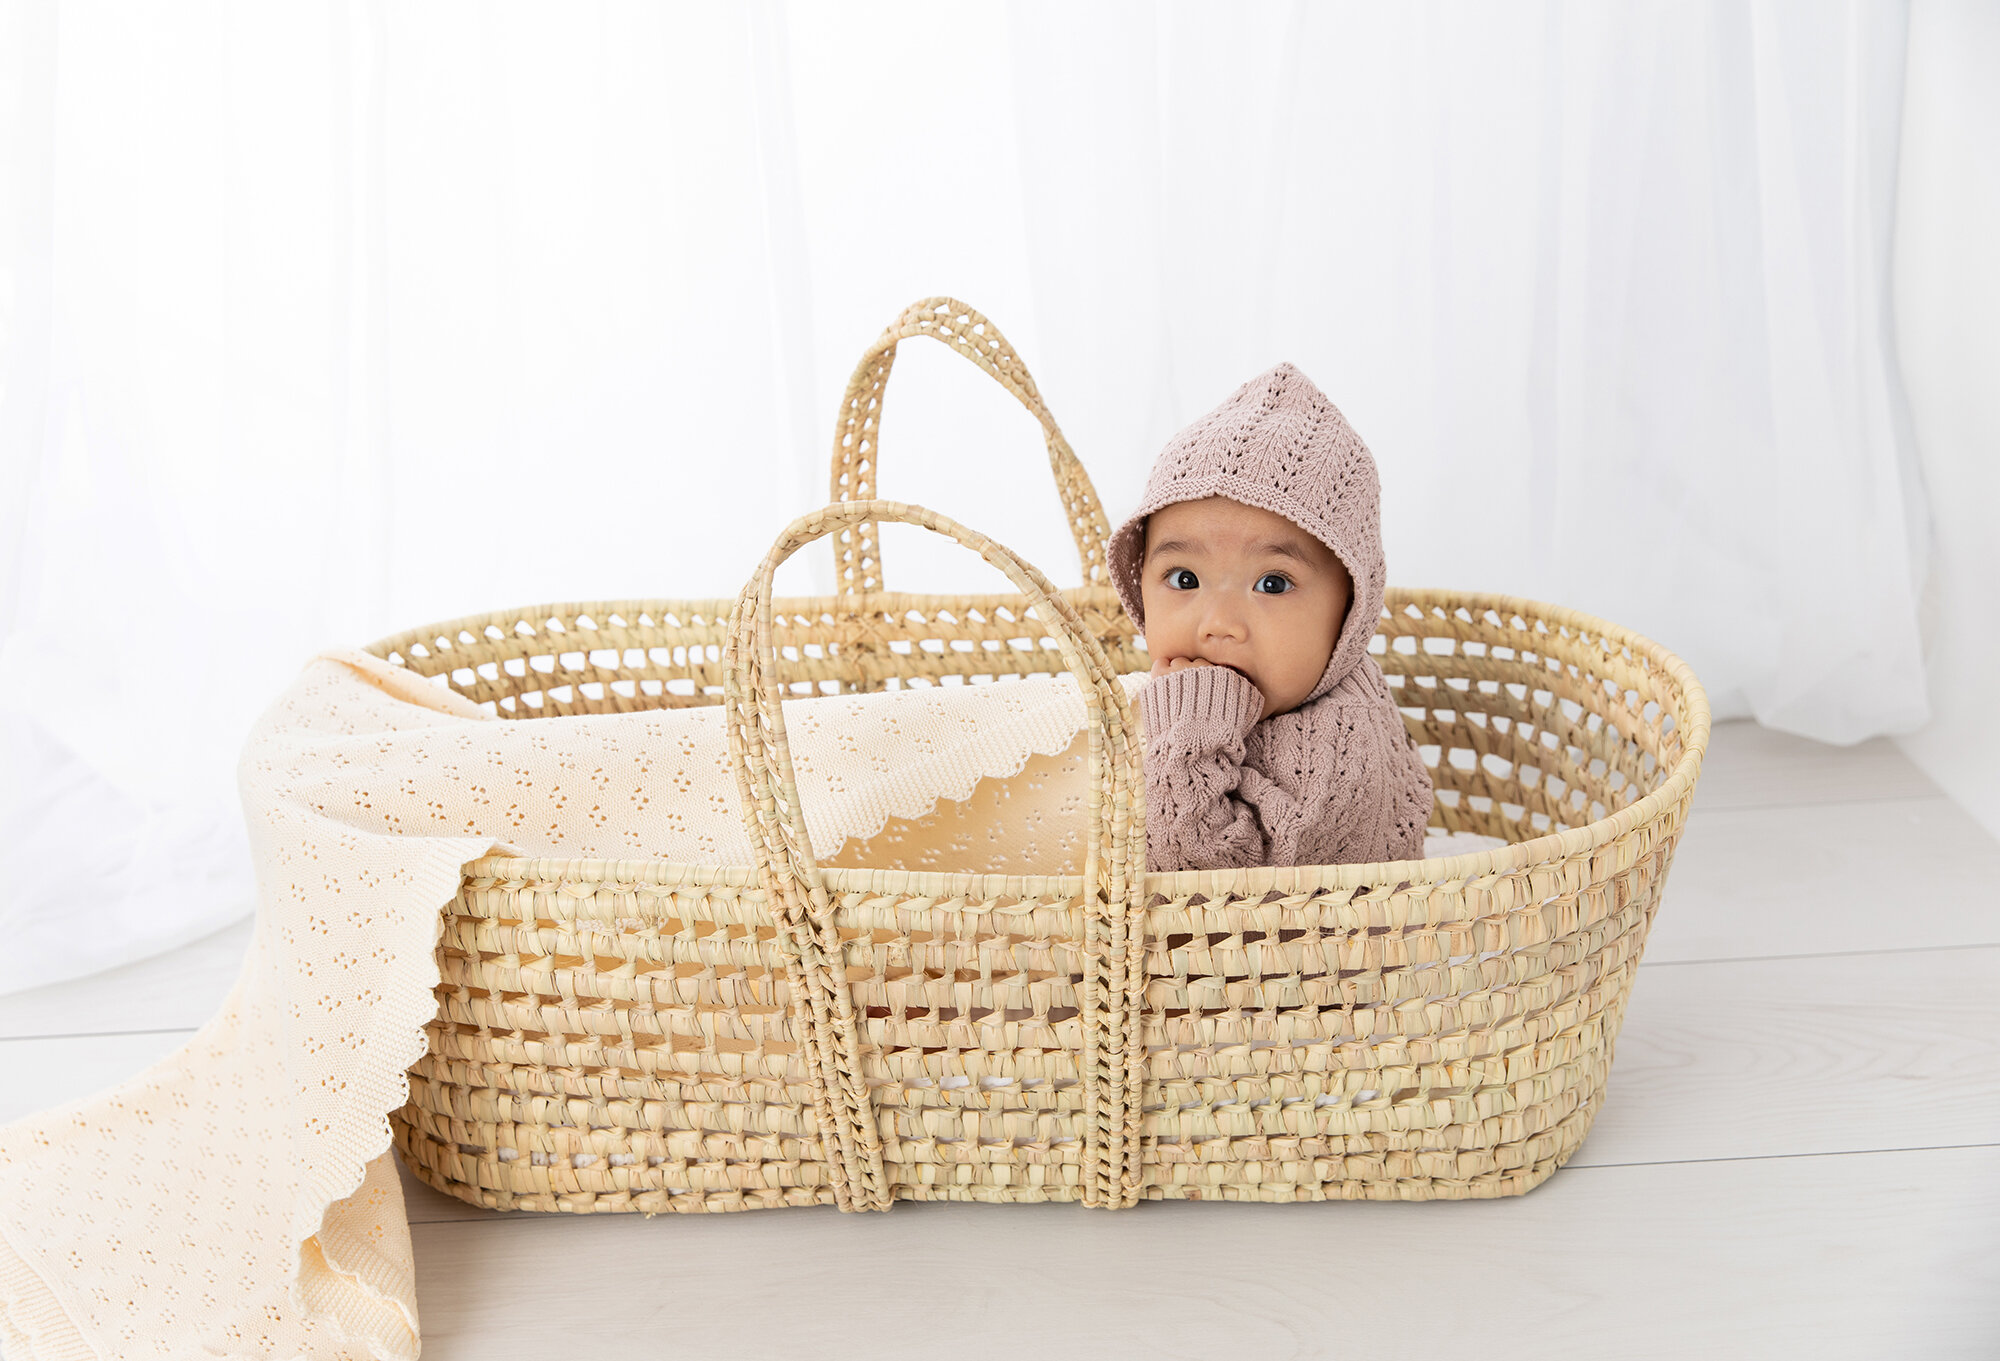 Baby girl in a mauve knit outfit and bonnet sitting a Moses basket by a white curtain